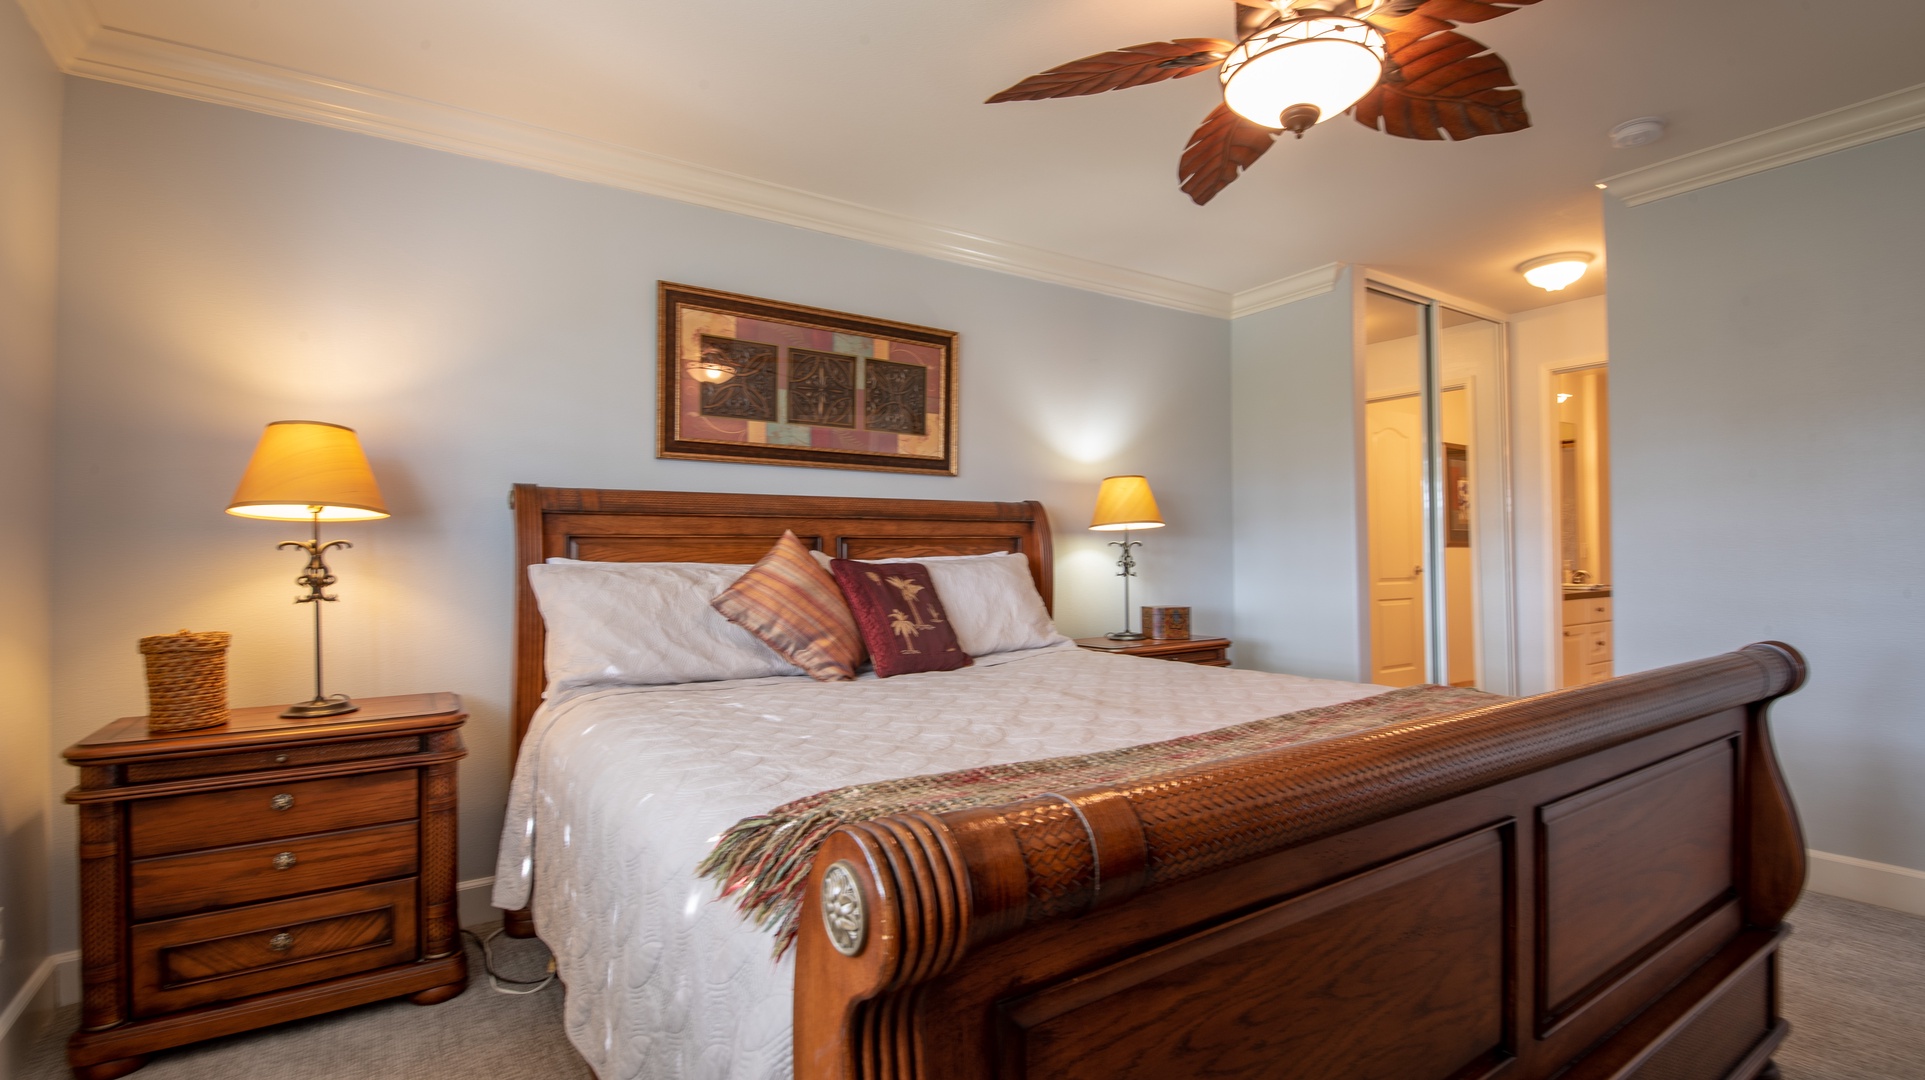 Kapolei Vacation Rentals, Ko Olina Kai 1047B - Watch your favorite shows on TV in the primary guest bedroom.